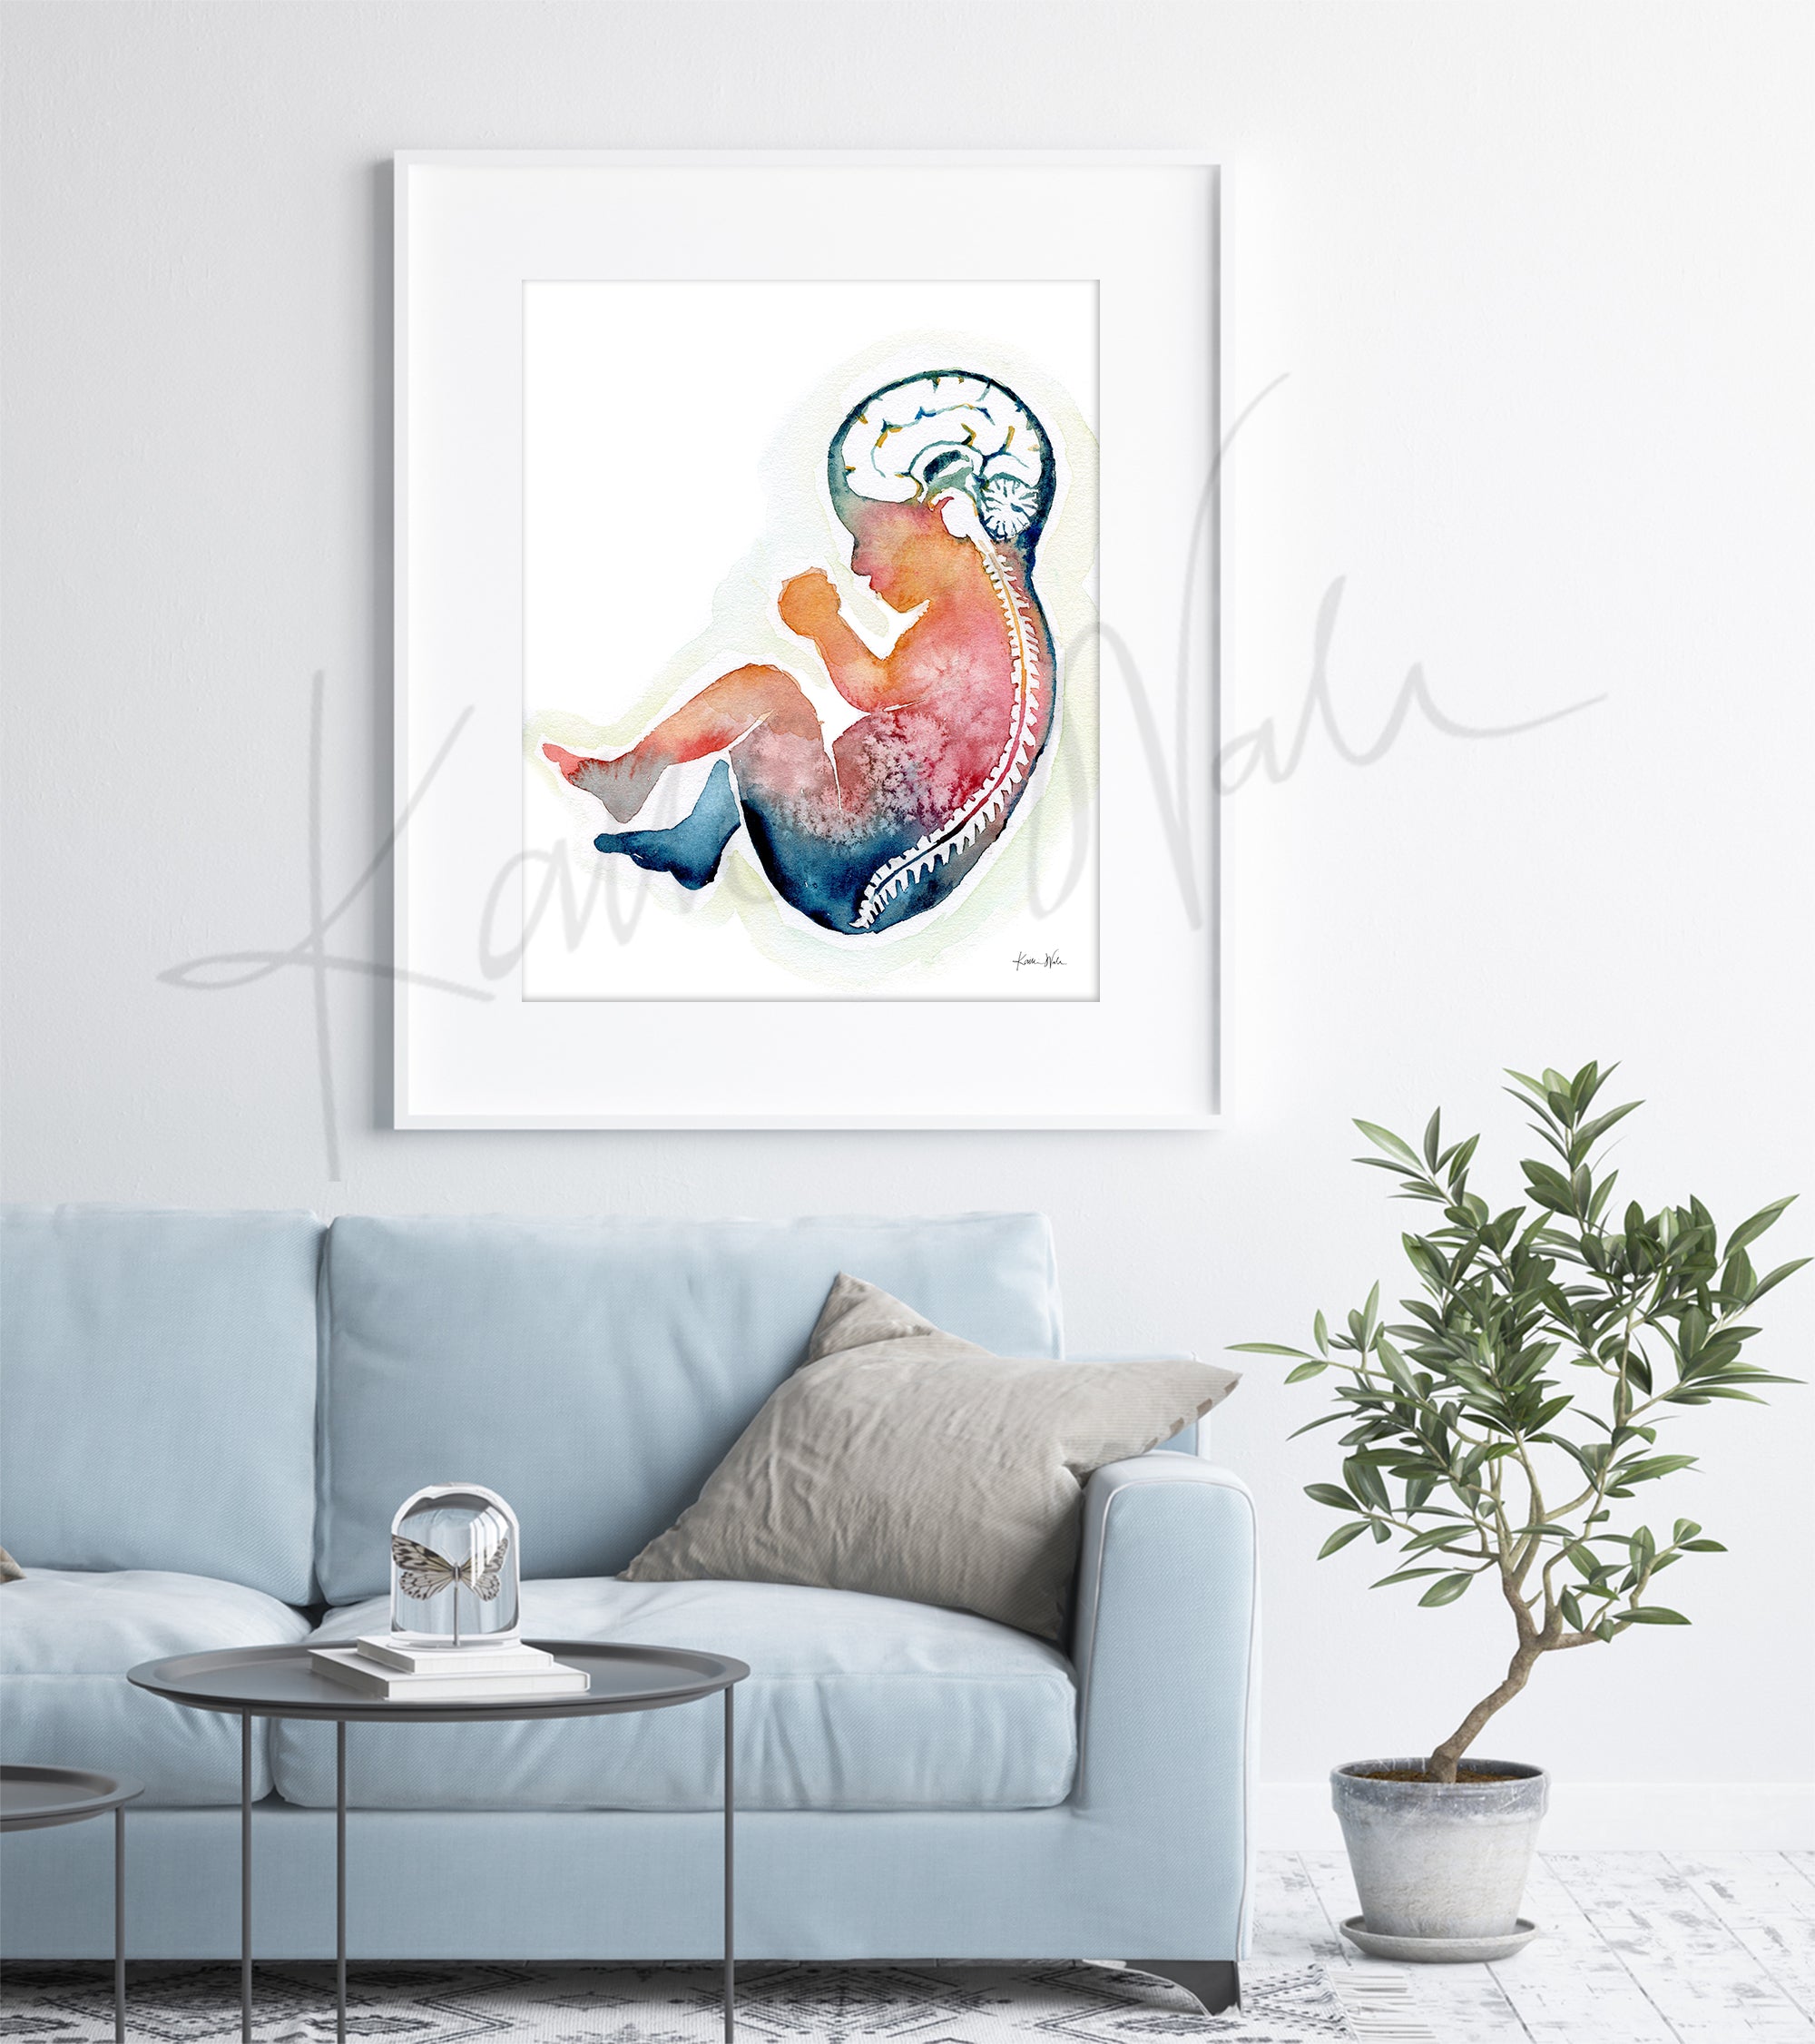 Framed watercolor painting of a fetus showing the spine and brain in rainbow colors. The framed print hangs above a blue couch.